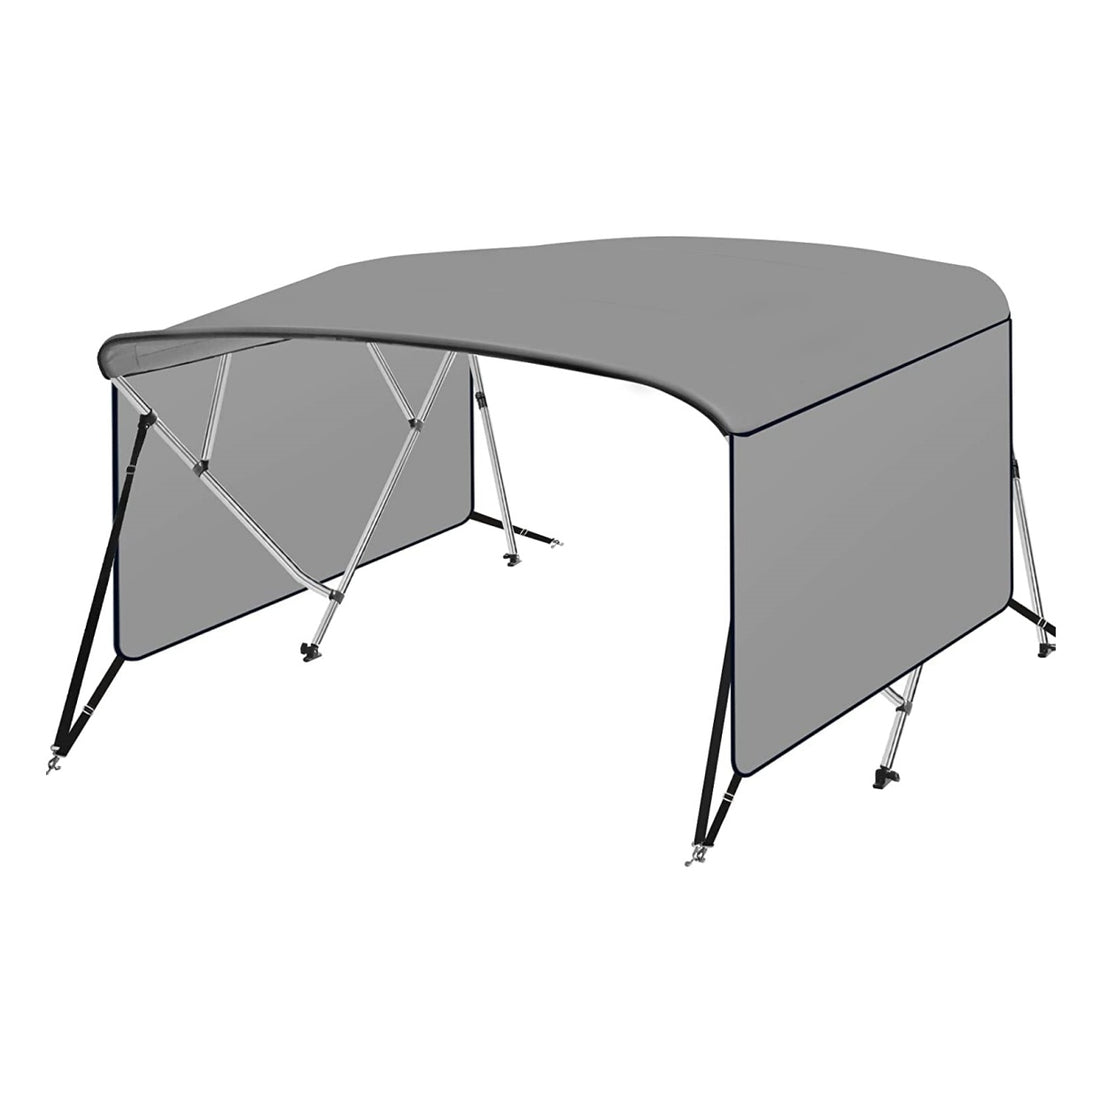 4 Bow Bimini Top Boat Cover with 1 Inch Aluminum Alloy Frame, Include 2 Straps, 2 Adjustable Rear Support Pole, Zippered Storage Boot, PU Coating Canvas